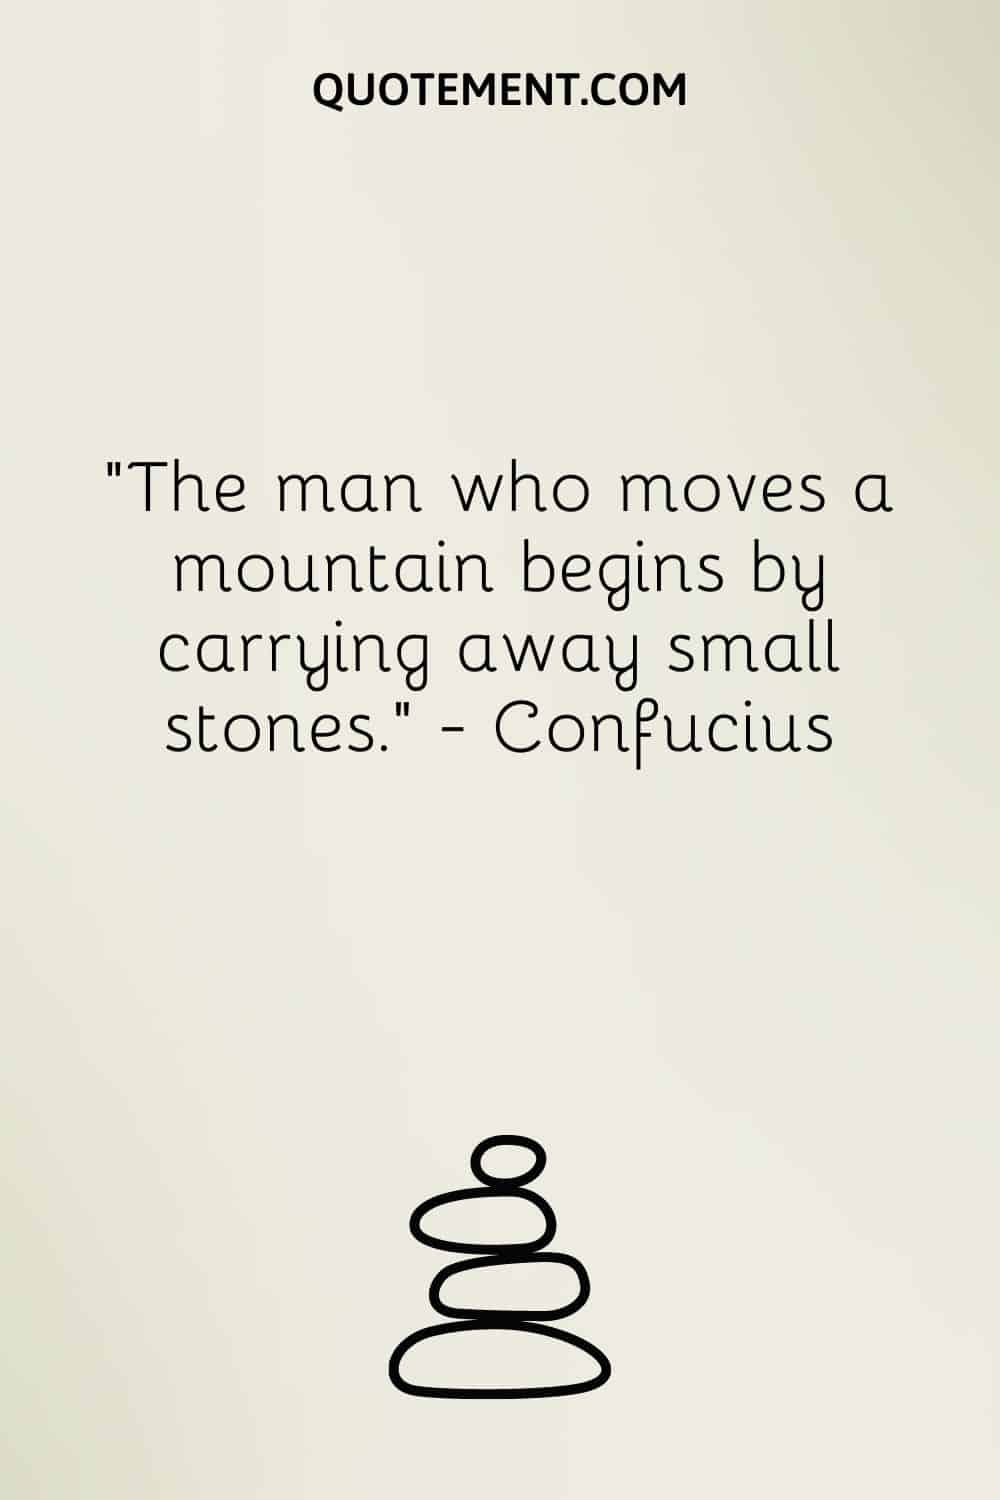 The man who moves a mountain begins by carrying away small stones